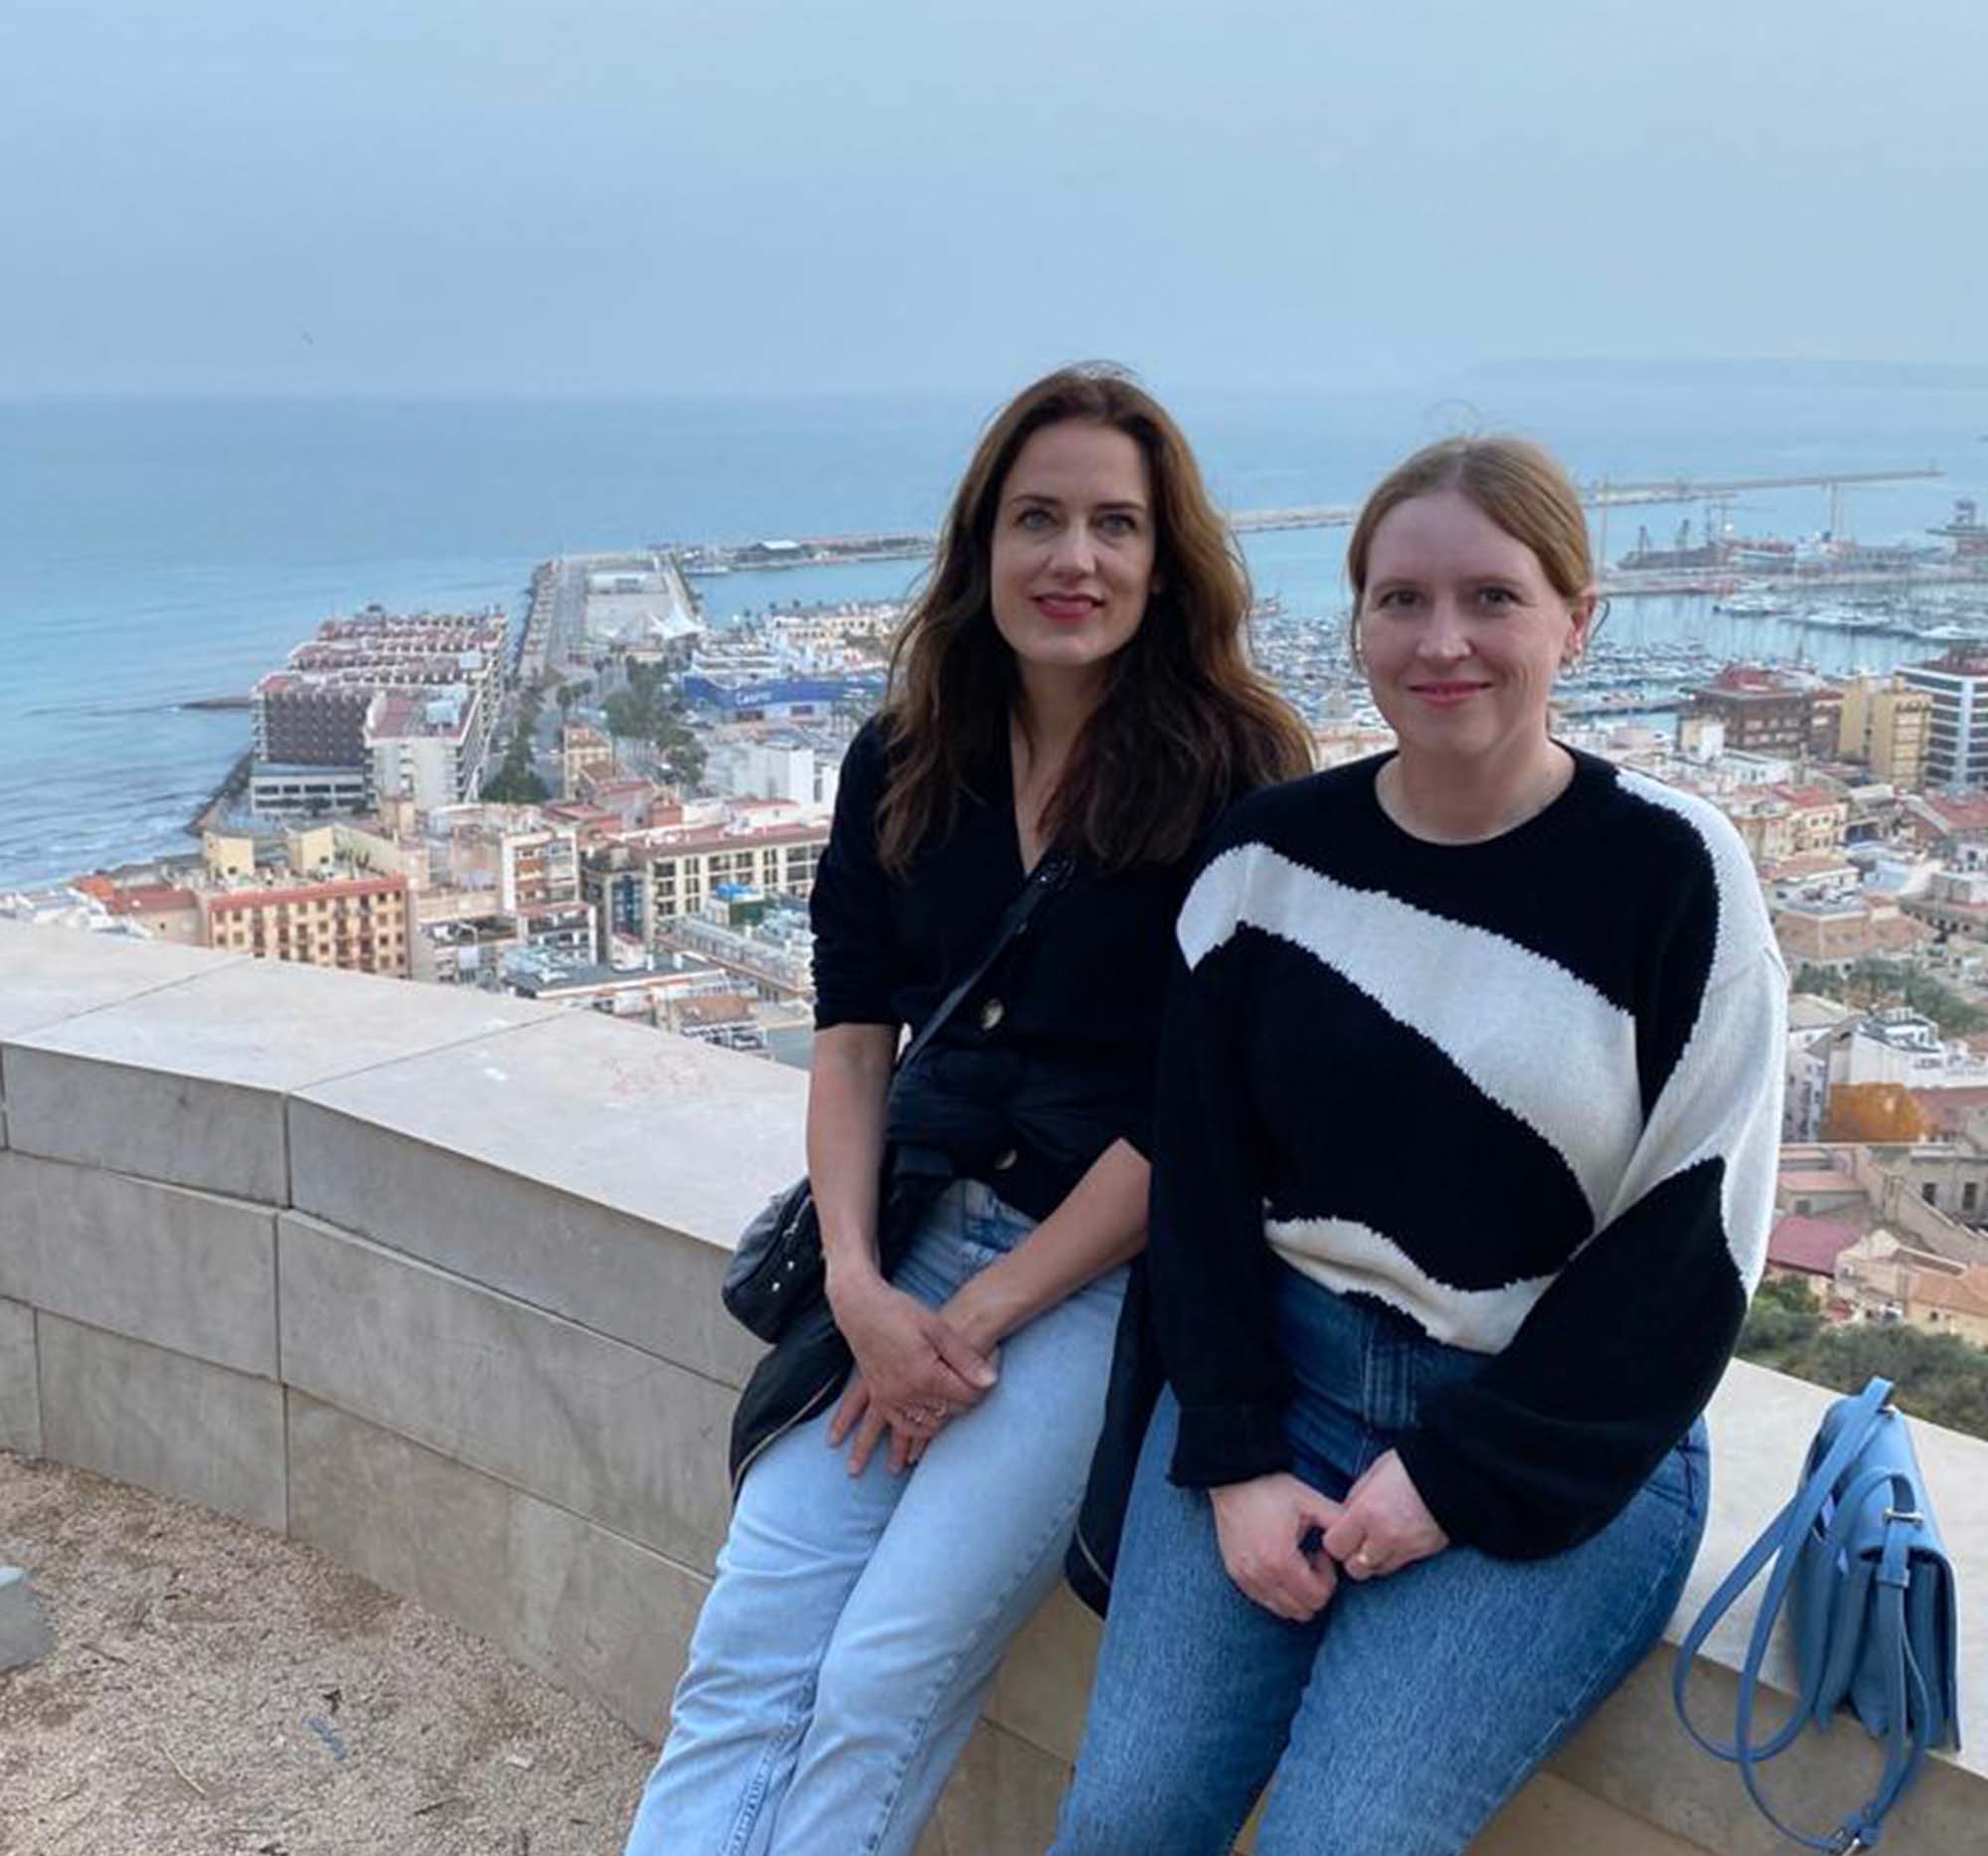 Kalie and Justine at a lookout in Spain